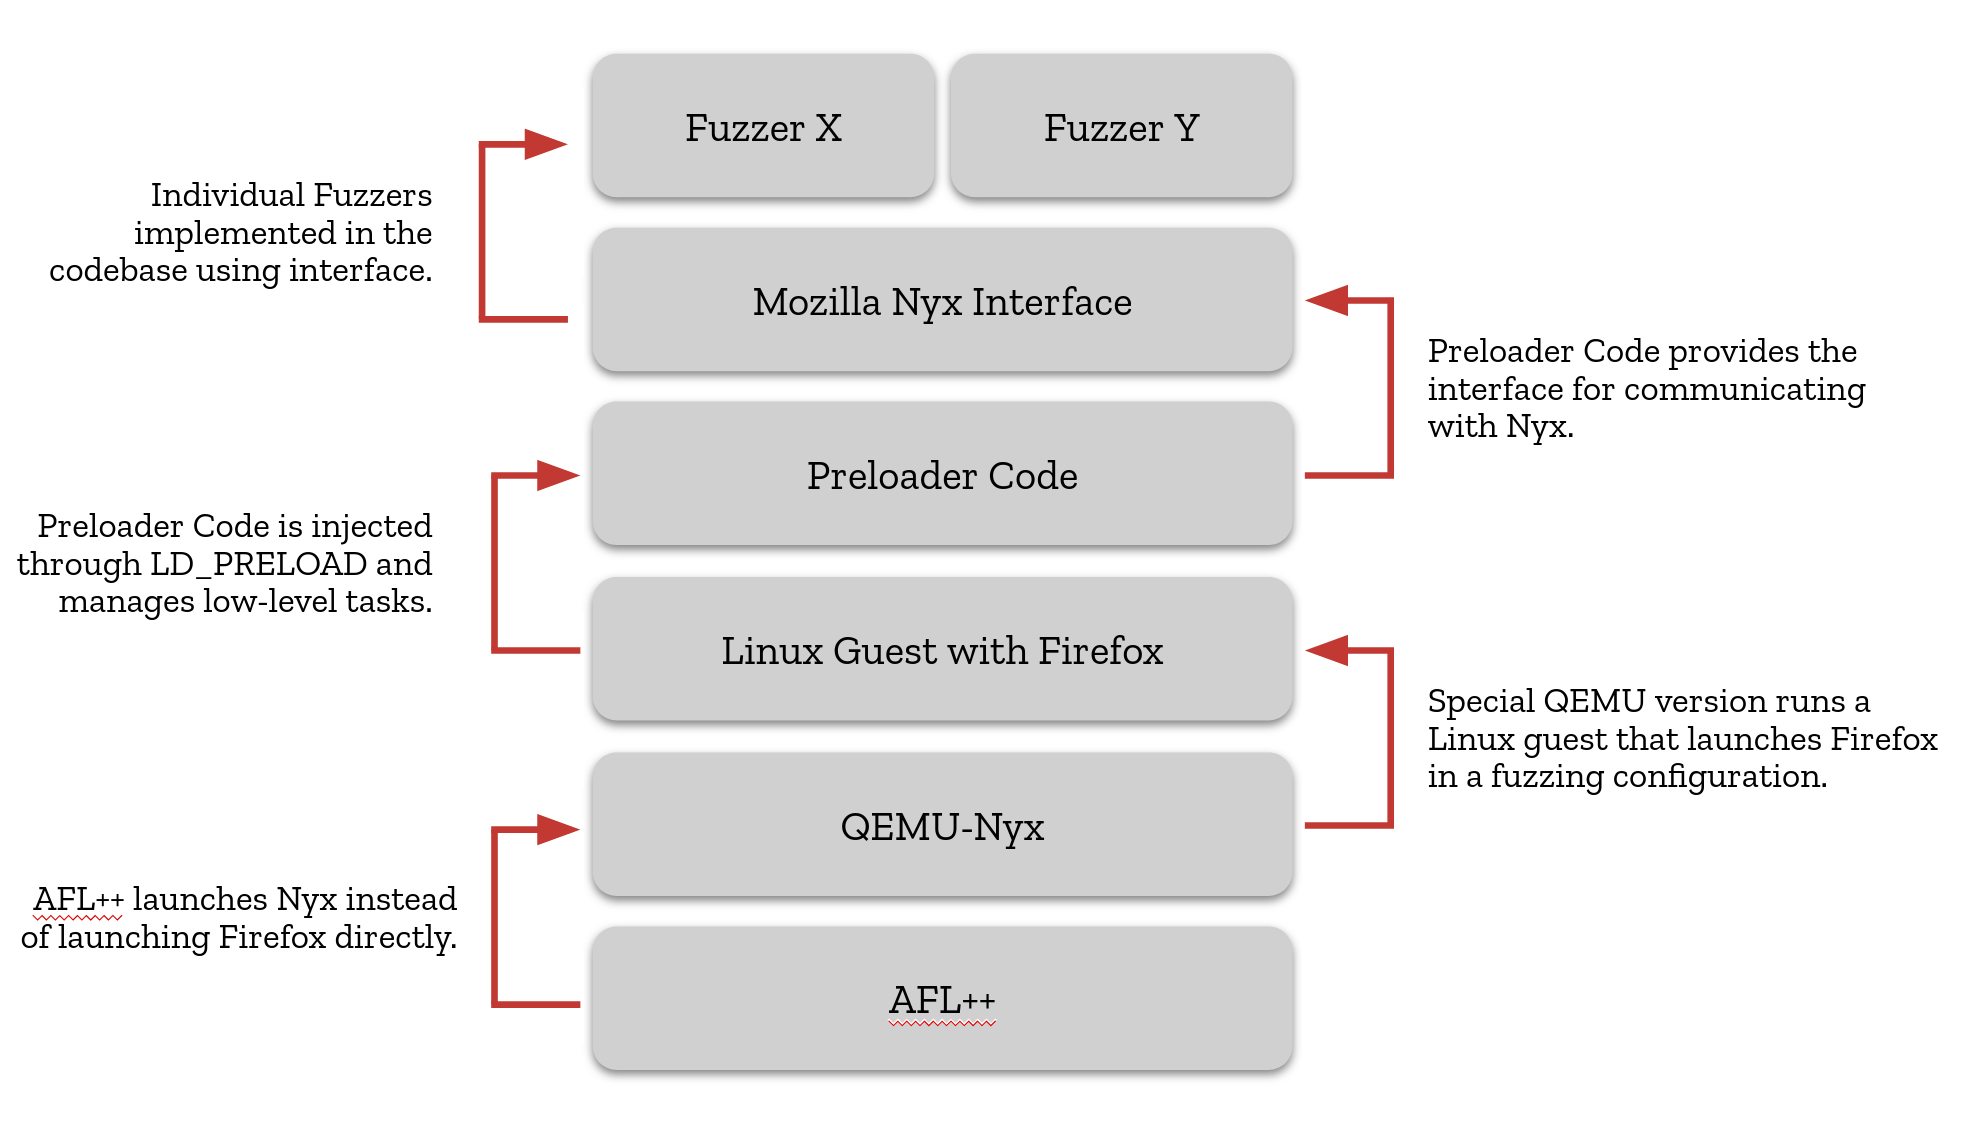 The snapshot fuzzing technology stack depicted from bottom to top: AFL++, QEMU-Nyx, Linux Guest with Firefox, Preloader Code, Mozilla Nyx Interface and on top of this multiple fuzzing targets.QEMU-Nyx is launched by AFL++, which then launches the Linux guest with Firefox in a fuzzing configuration. The preloader code is injected with LD_PRELOAD and manages low-level tasks as well as providing the communication interface to the Mozilla Nyx interface.